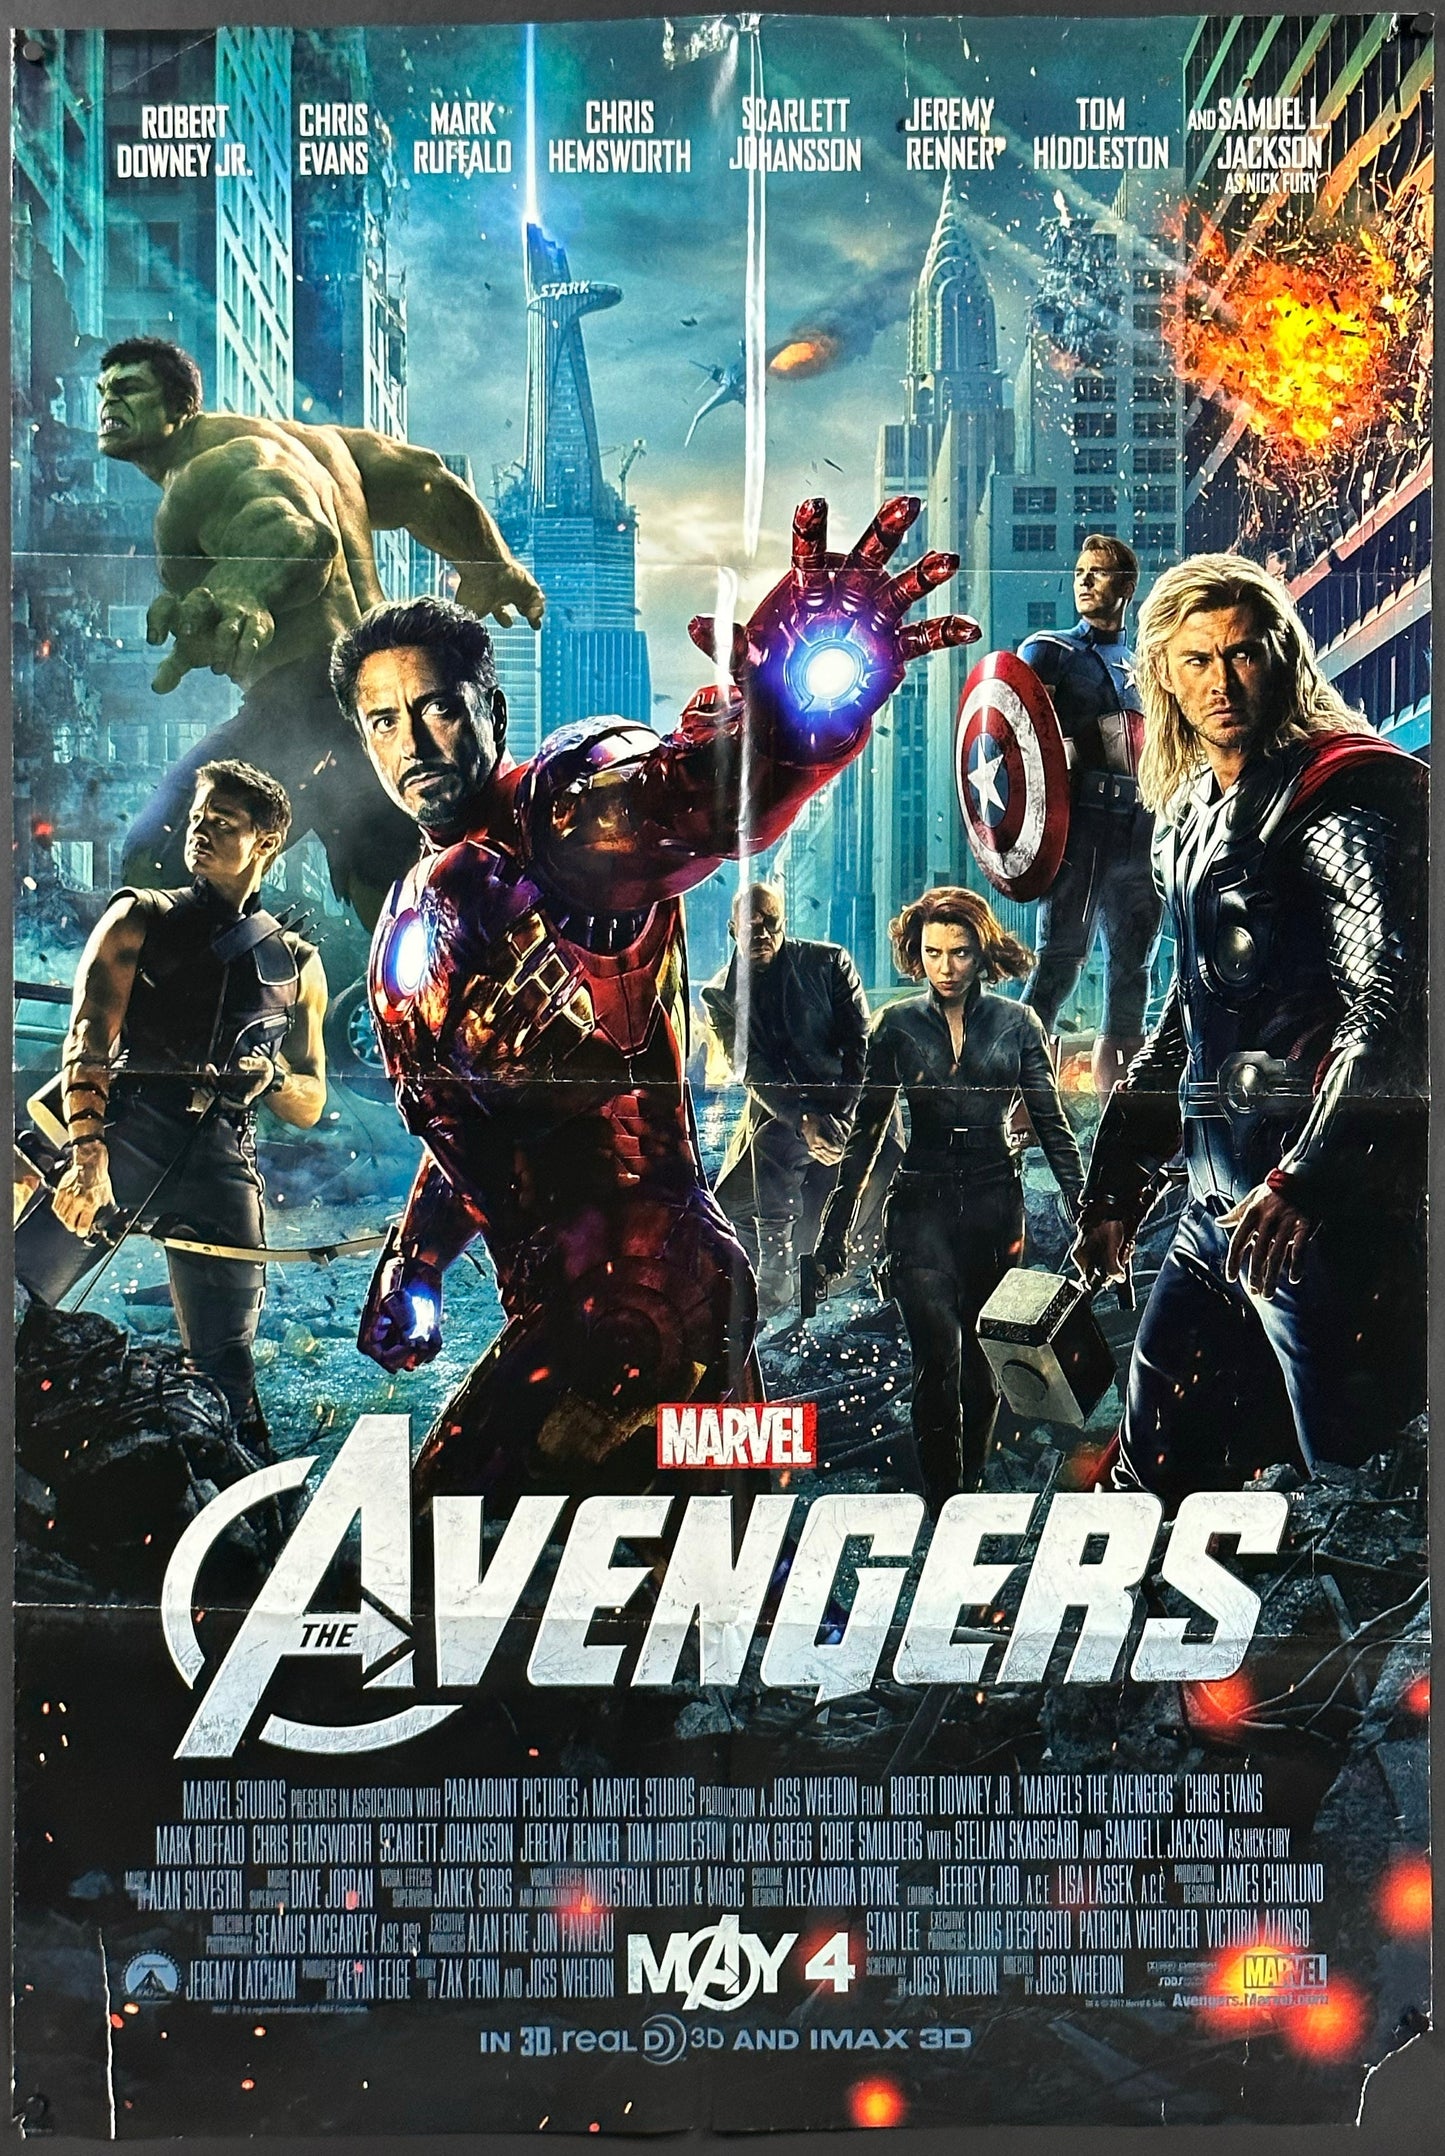 The Avengers US One Sheet (2012) - ORIGINAL RELEASE - posterpalace.com